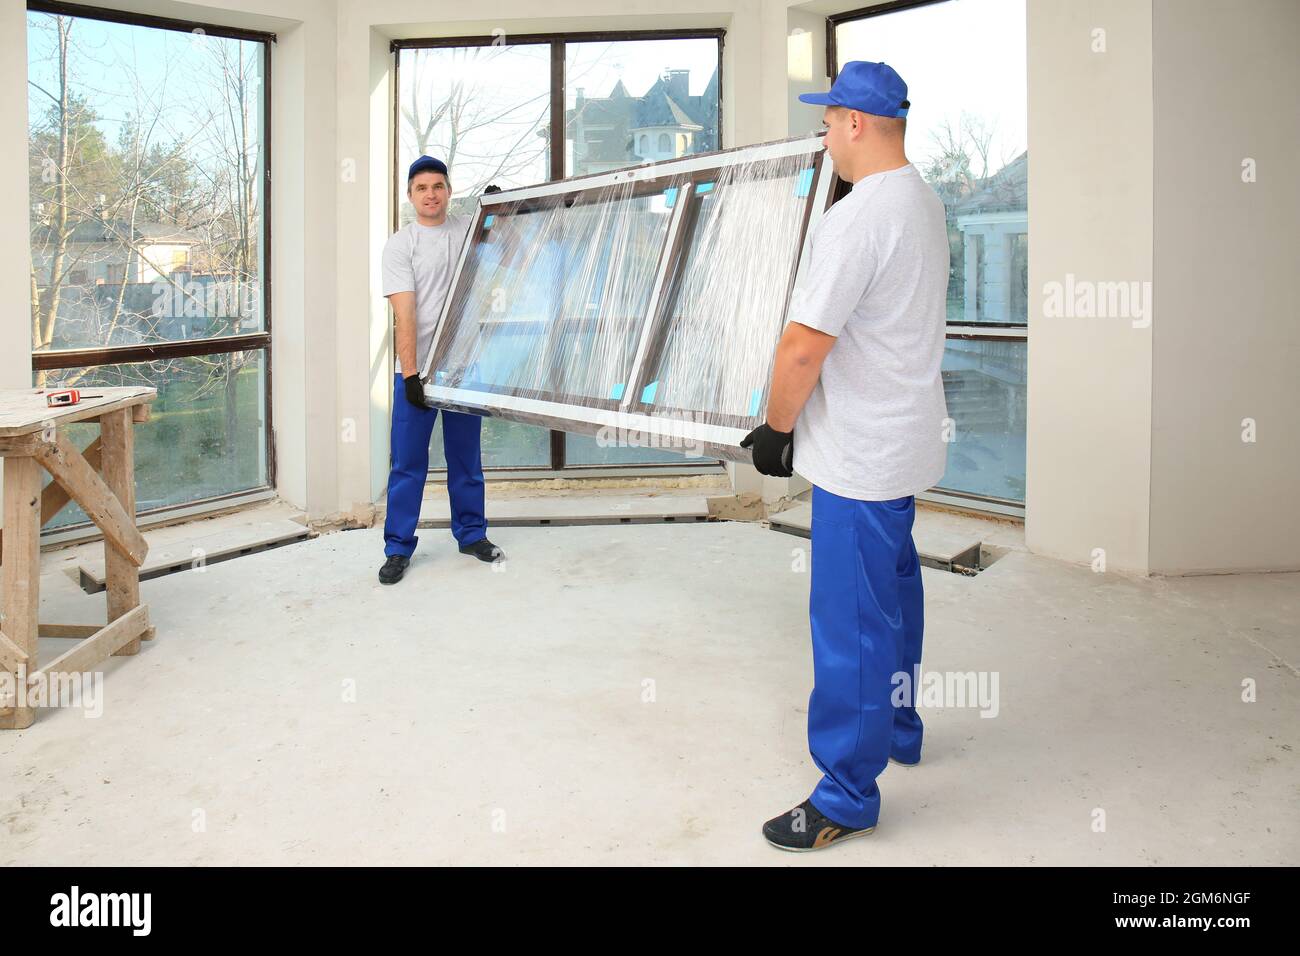 Construction workers carrying window glass indoors Stock Photo - Alamy